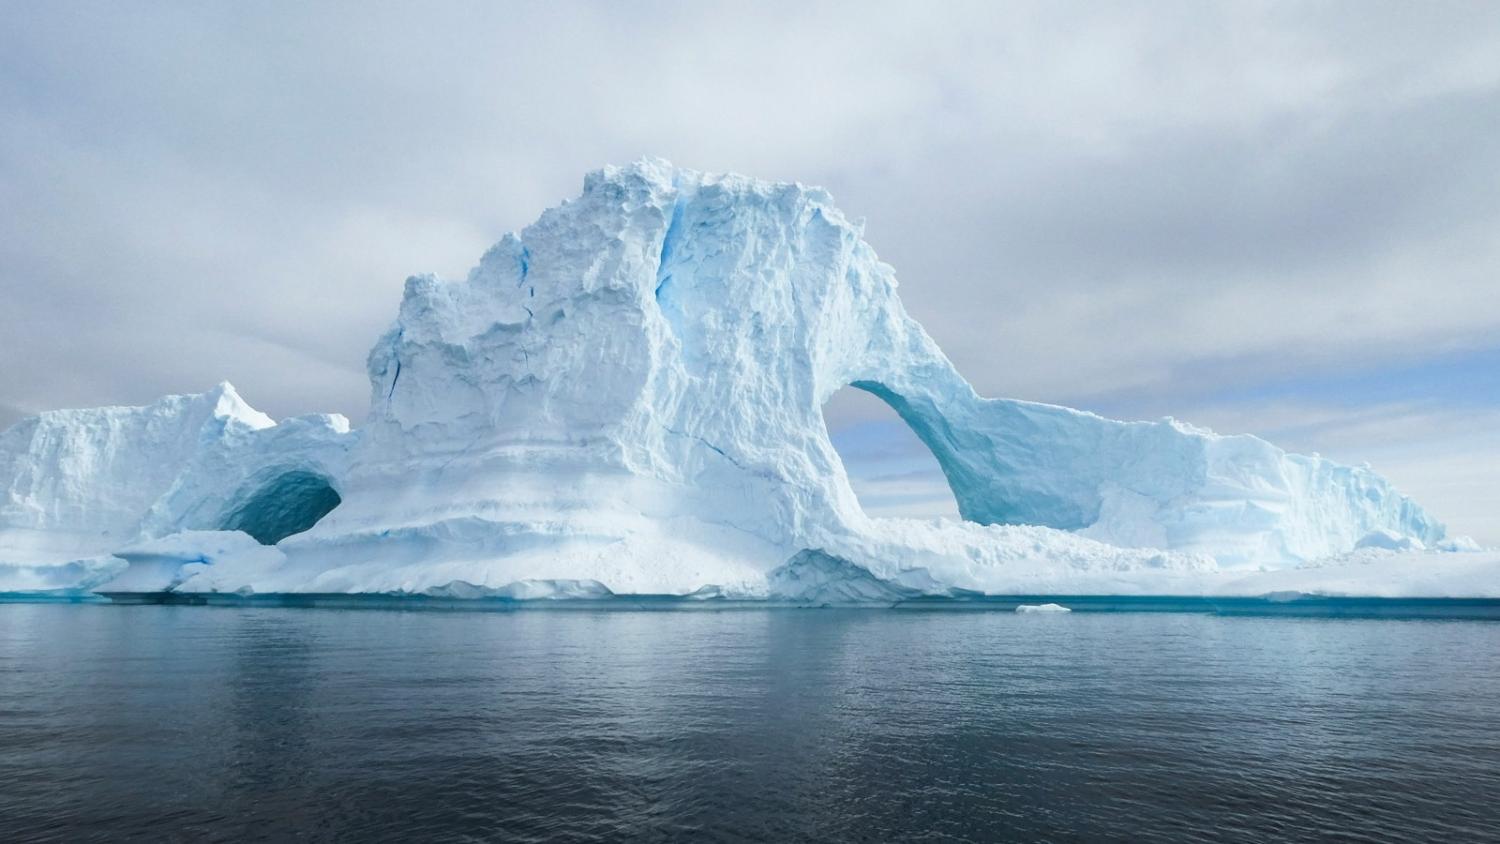 Russia and China have repeatedly rejected new marine protection areas in Antarctica